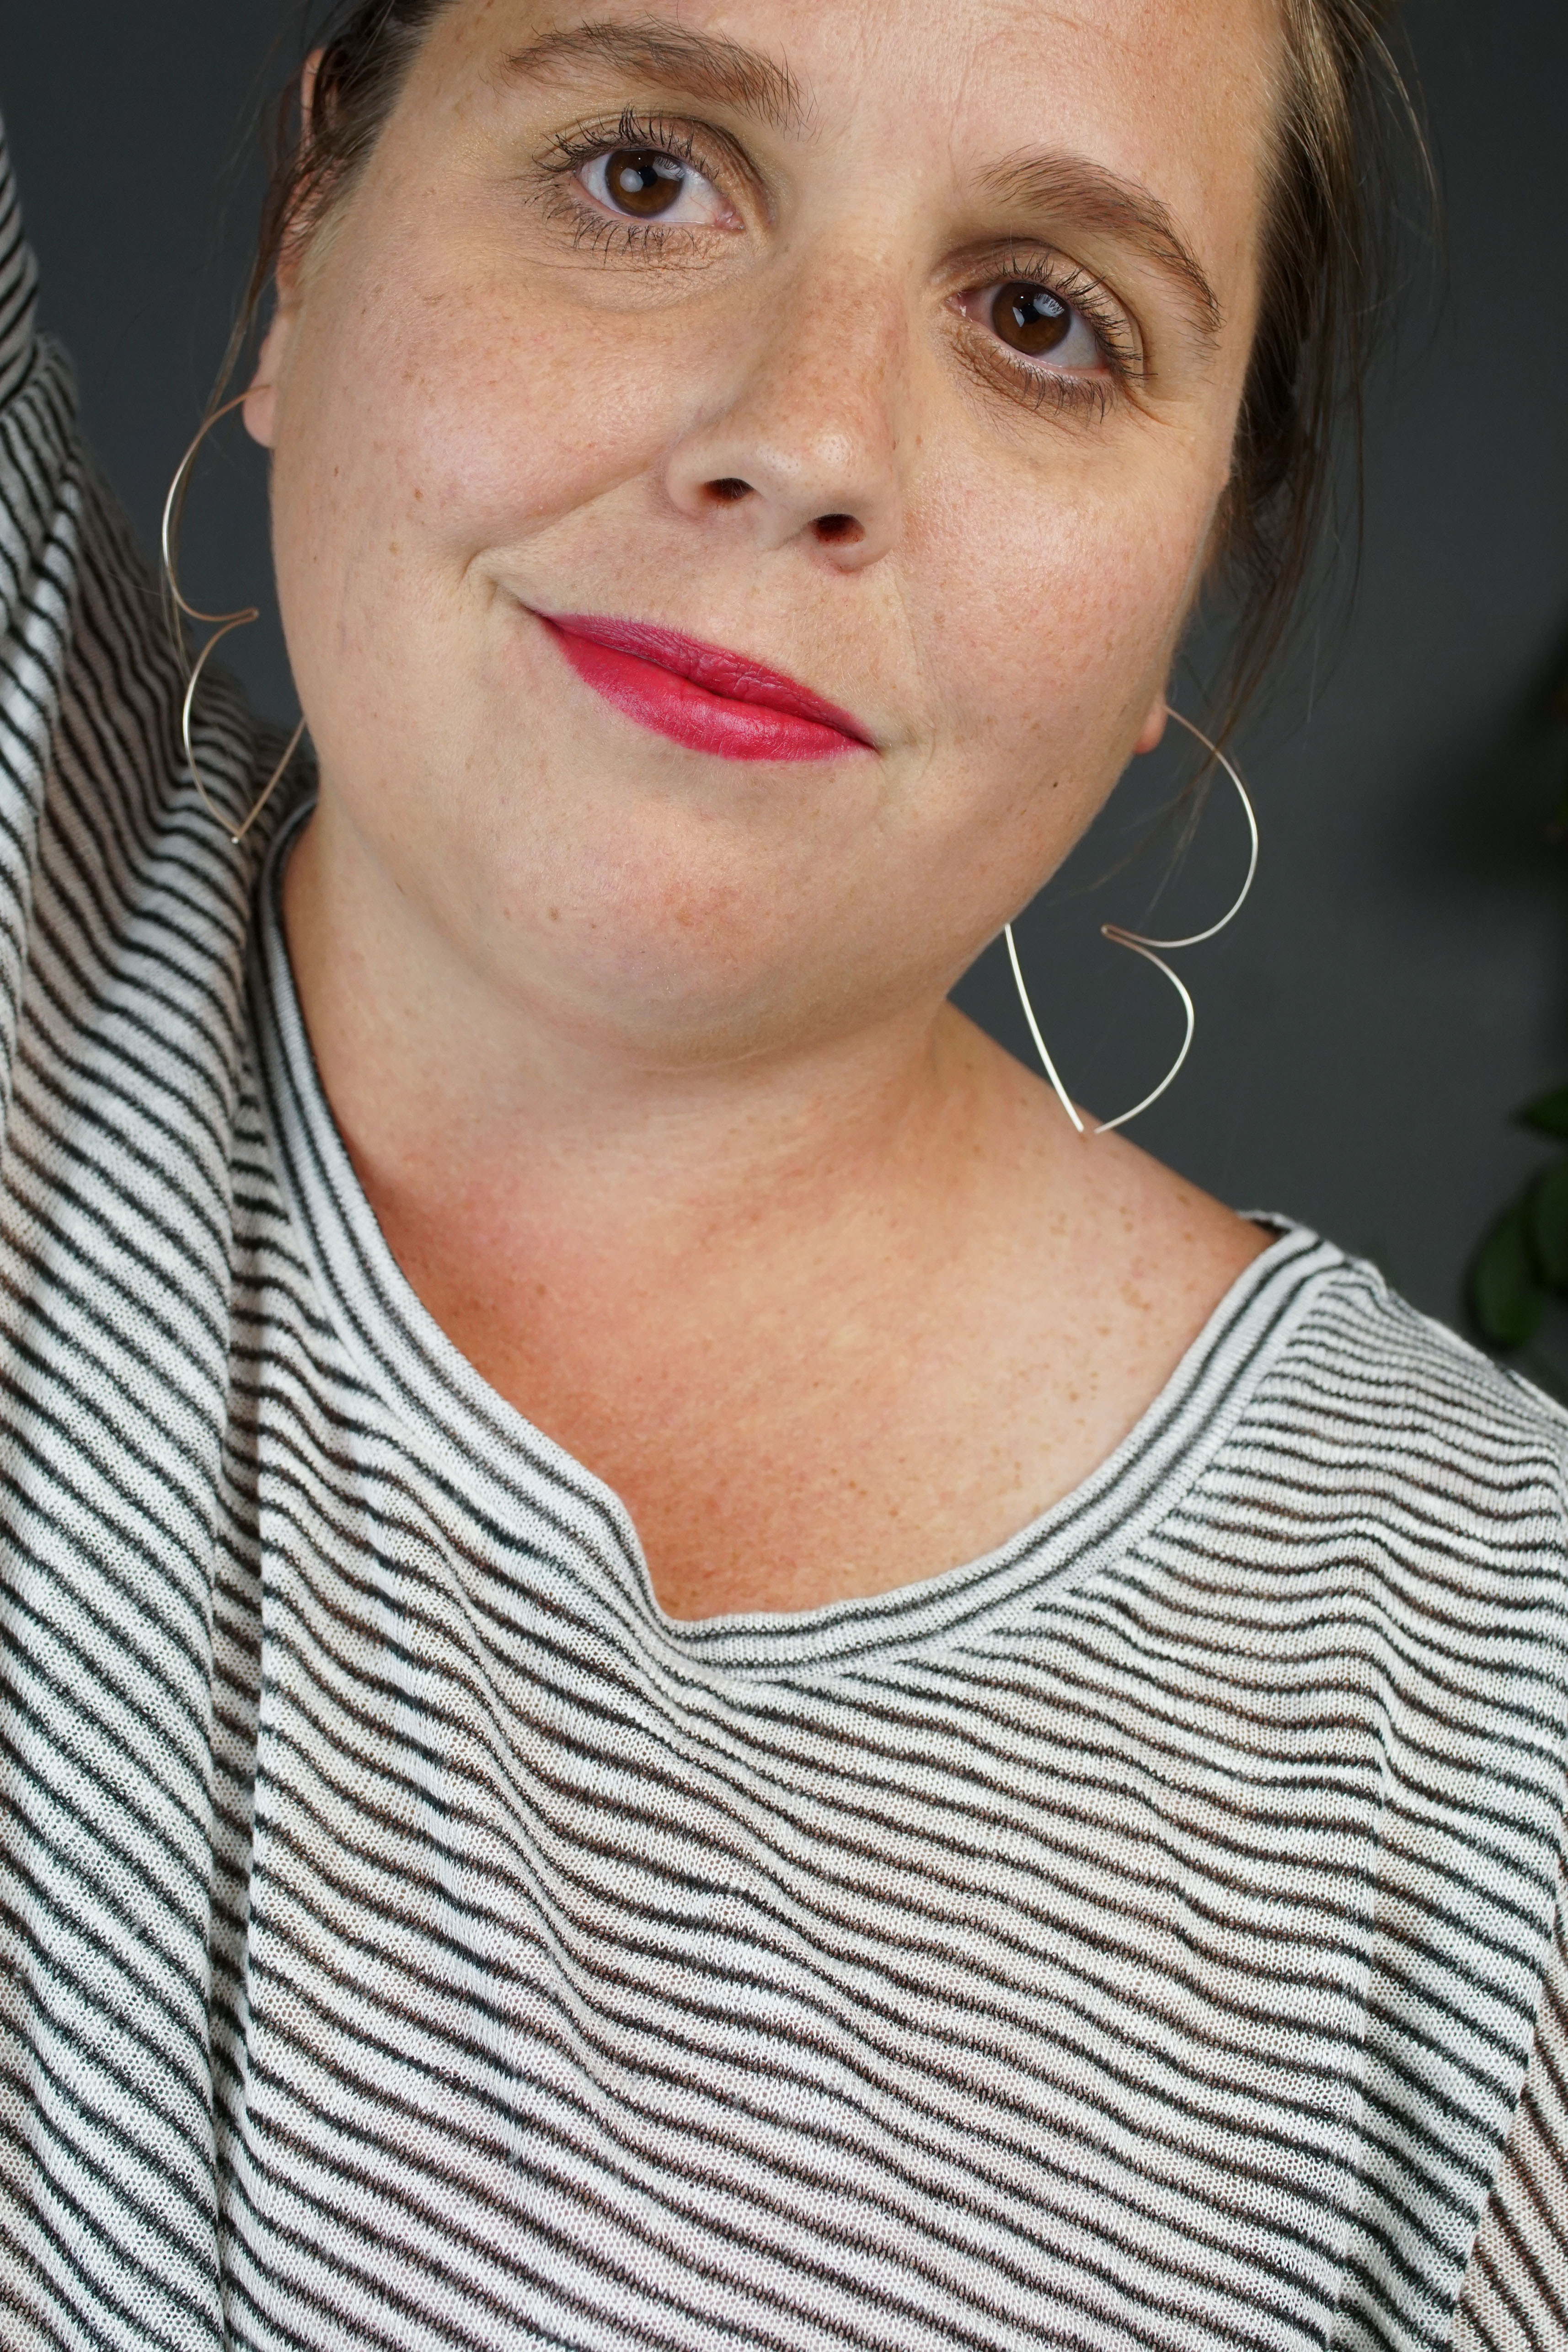 portrait of a woman with a bold red lip wearing a striped shirt and silver threader hoop earrings